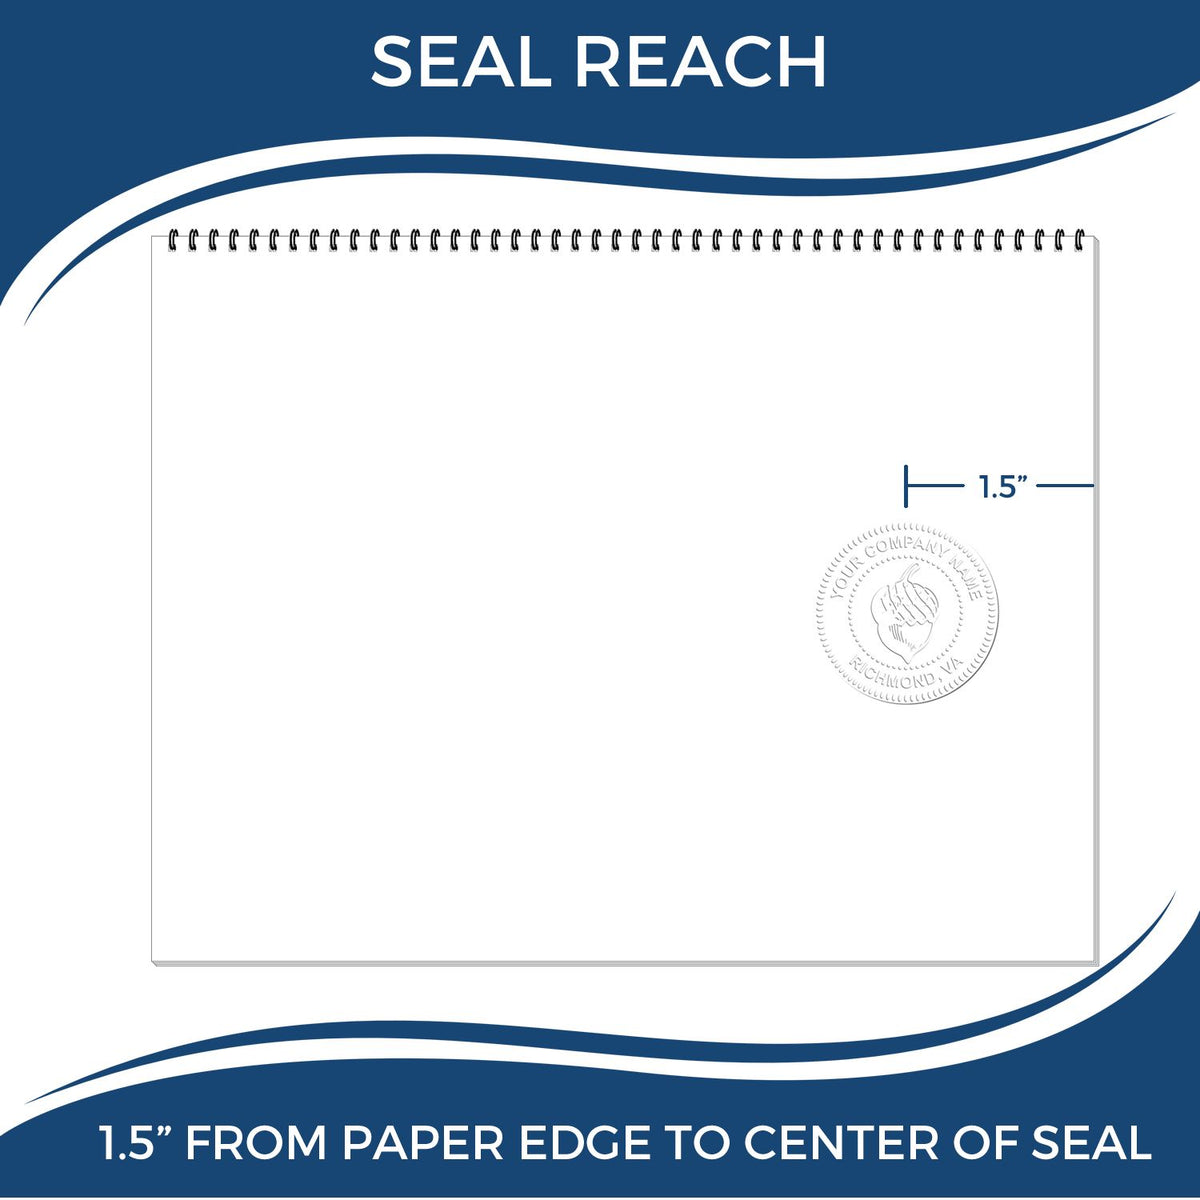 An infographic showing the seal reach which is represented by a ruler and a miniature seal image of the Hybrid New Hampshire Architect Seal